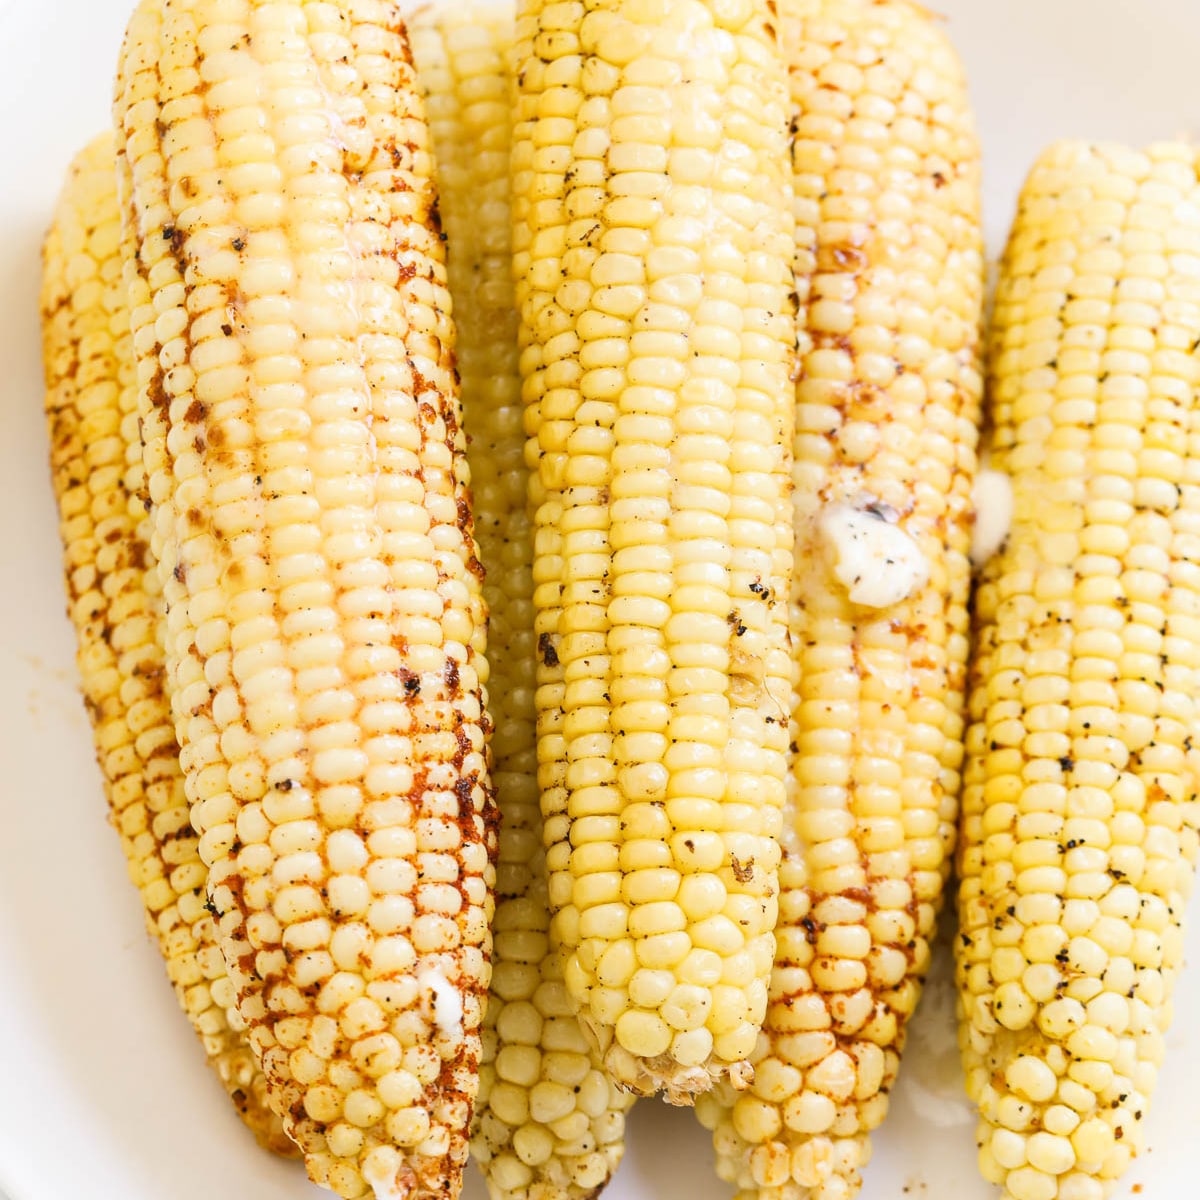 Ears of grilled corn on a white platter seasoned with melted butter on top.